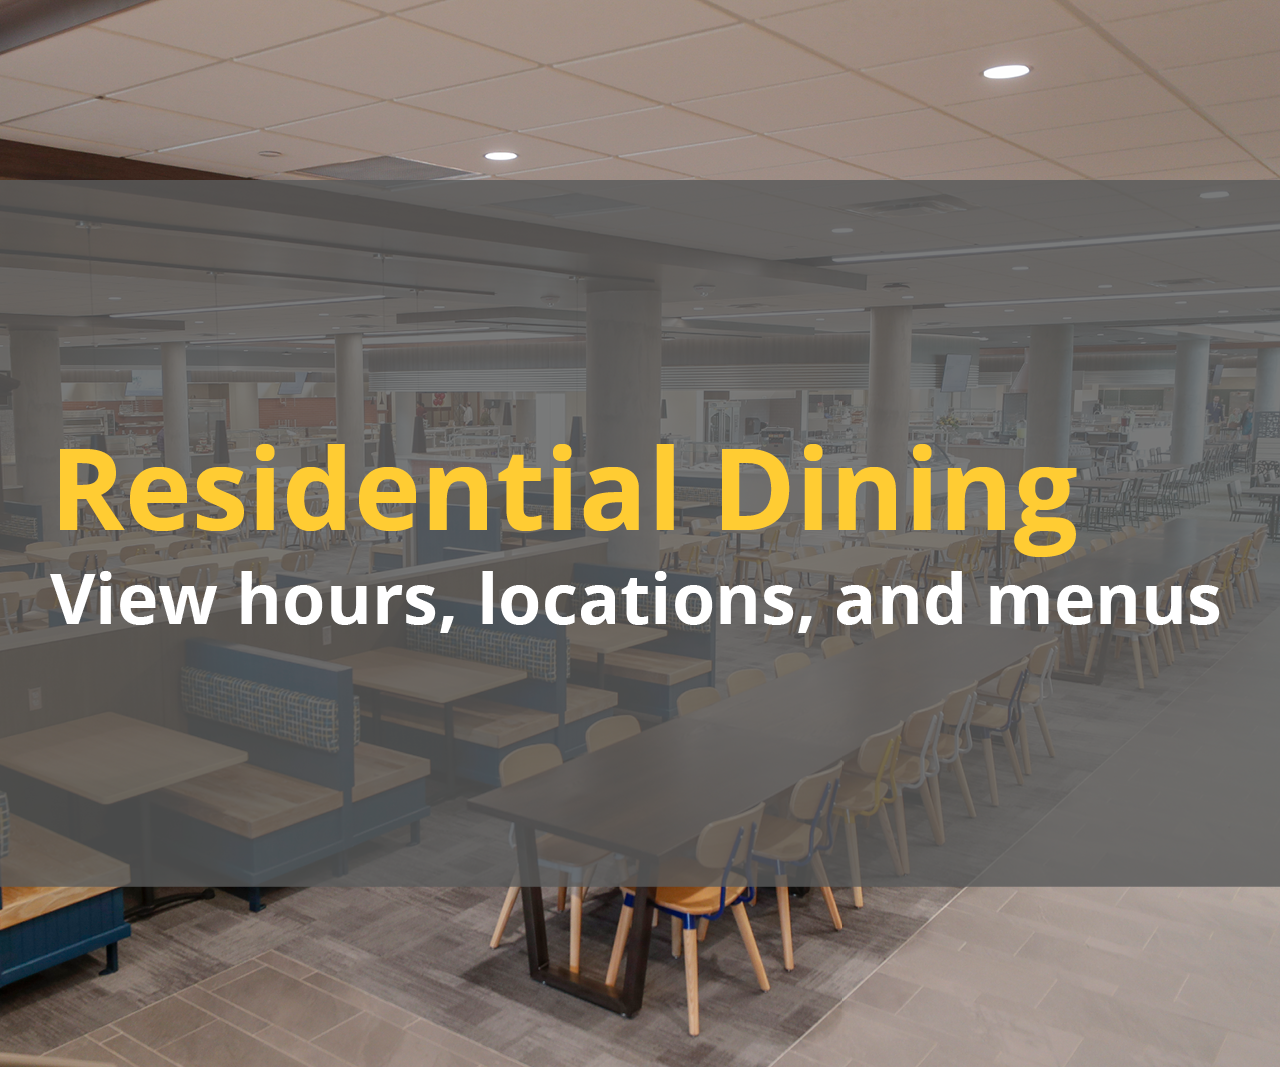 View Residential Dining Hours and Locations